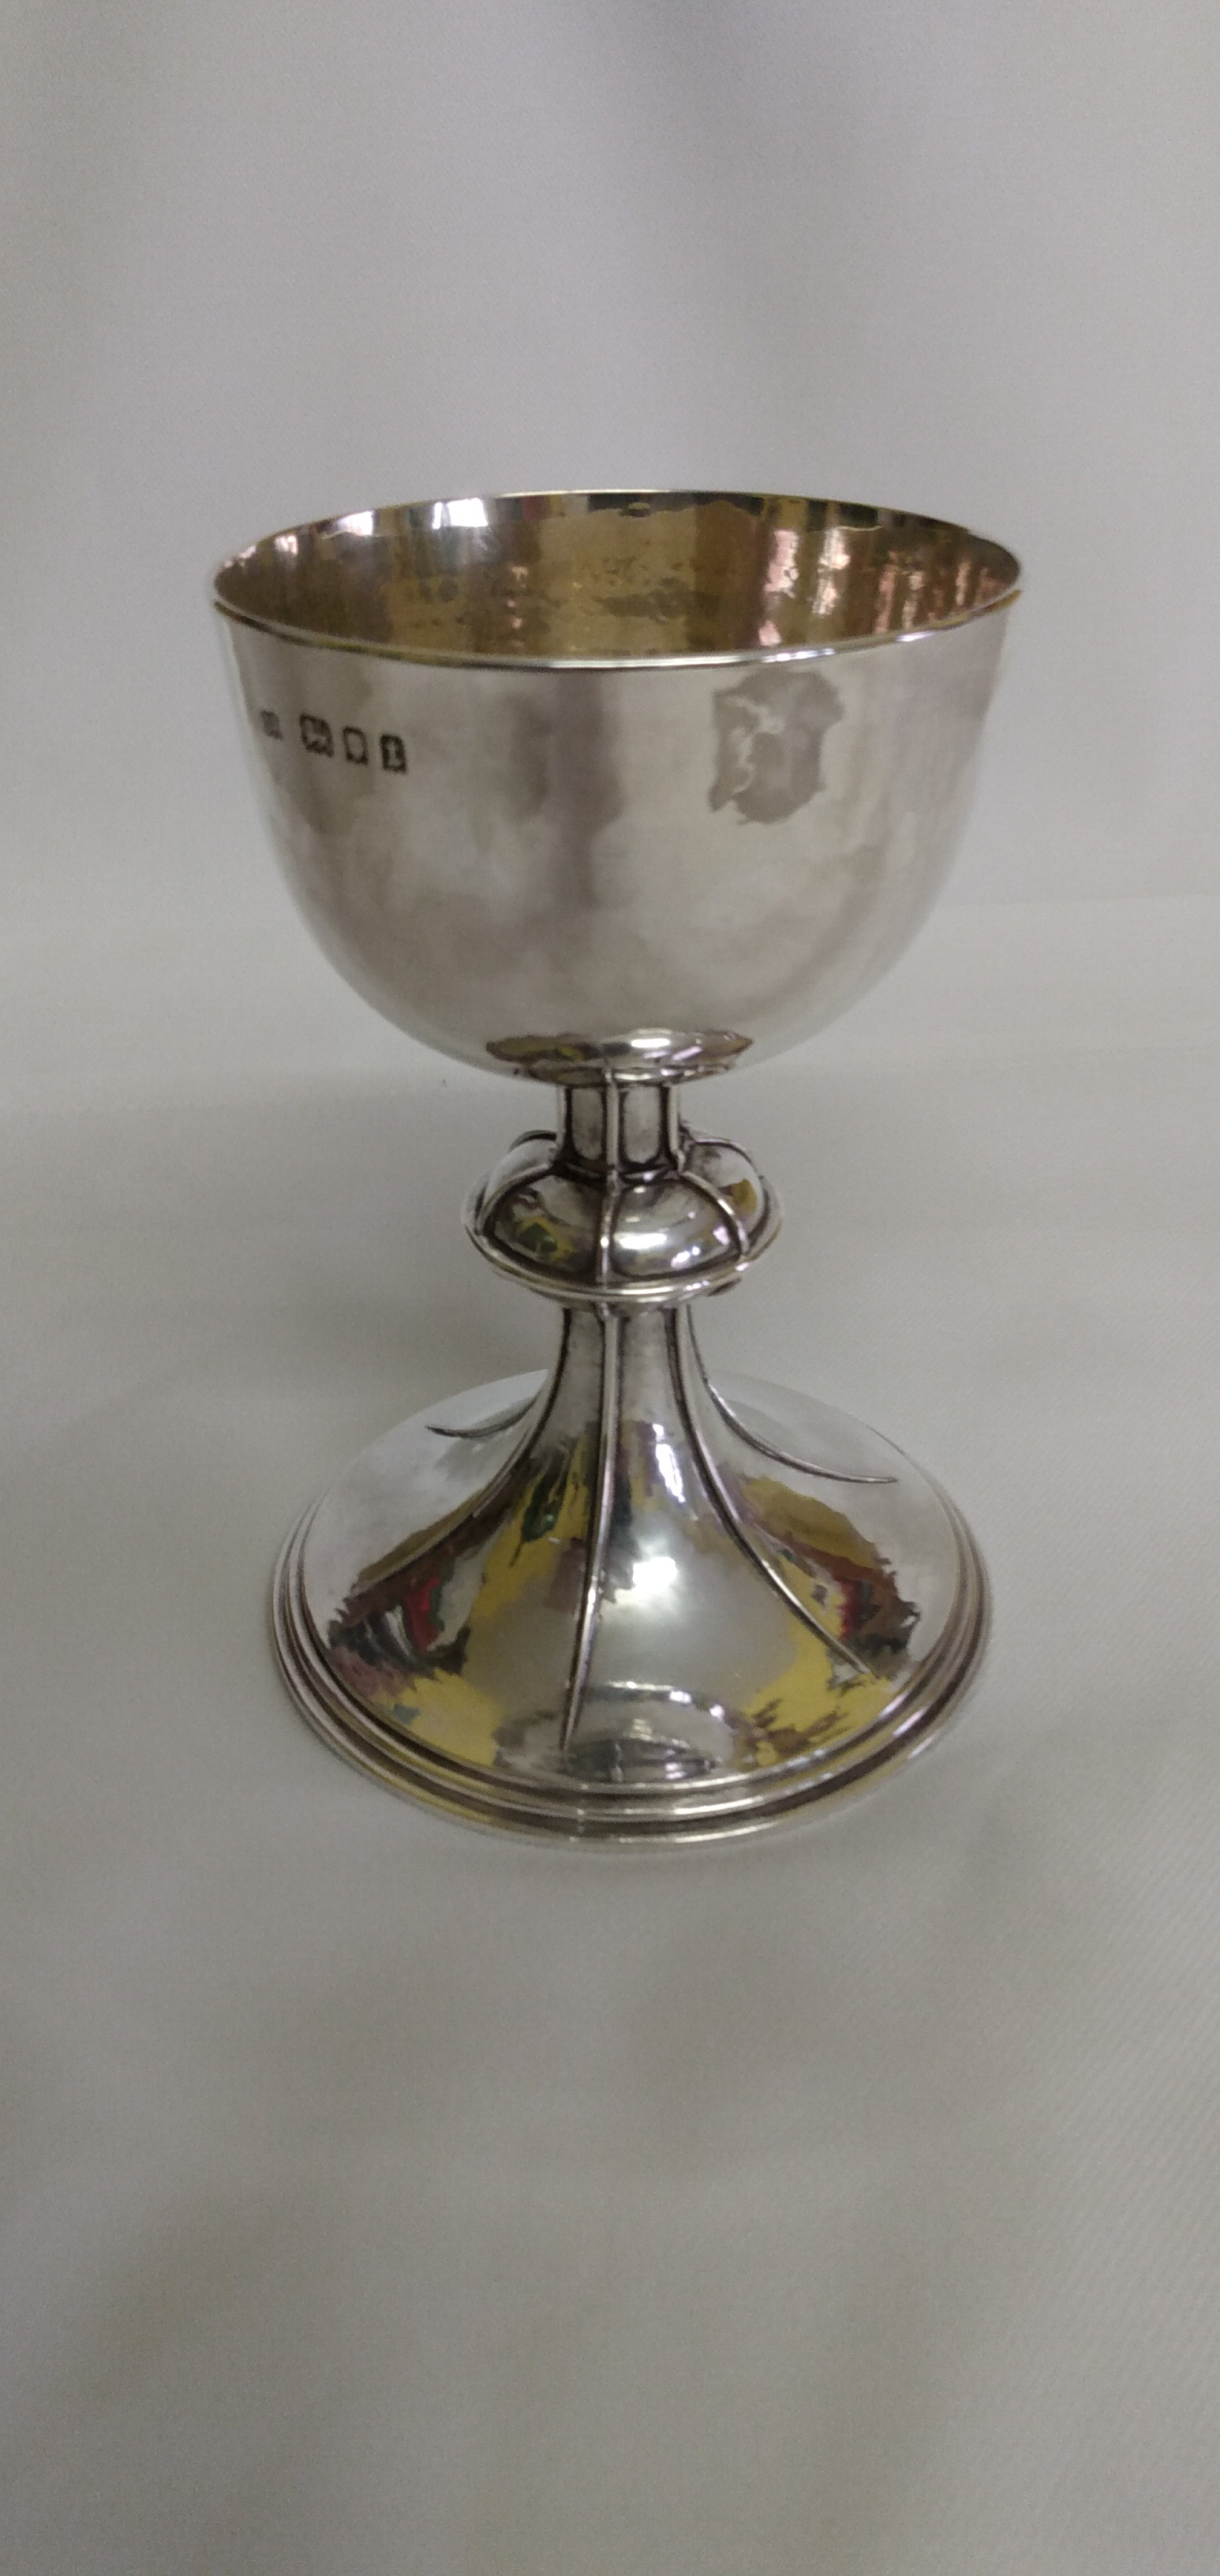 images/Ramsden/The secomd chalice.jpg